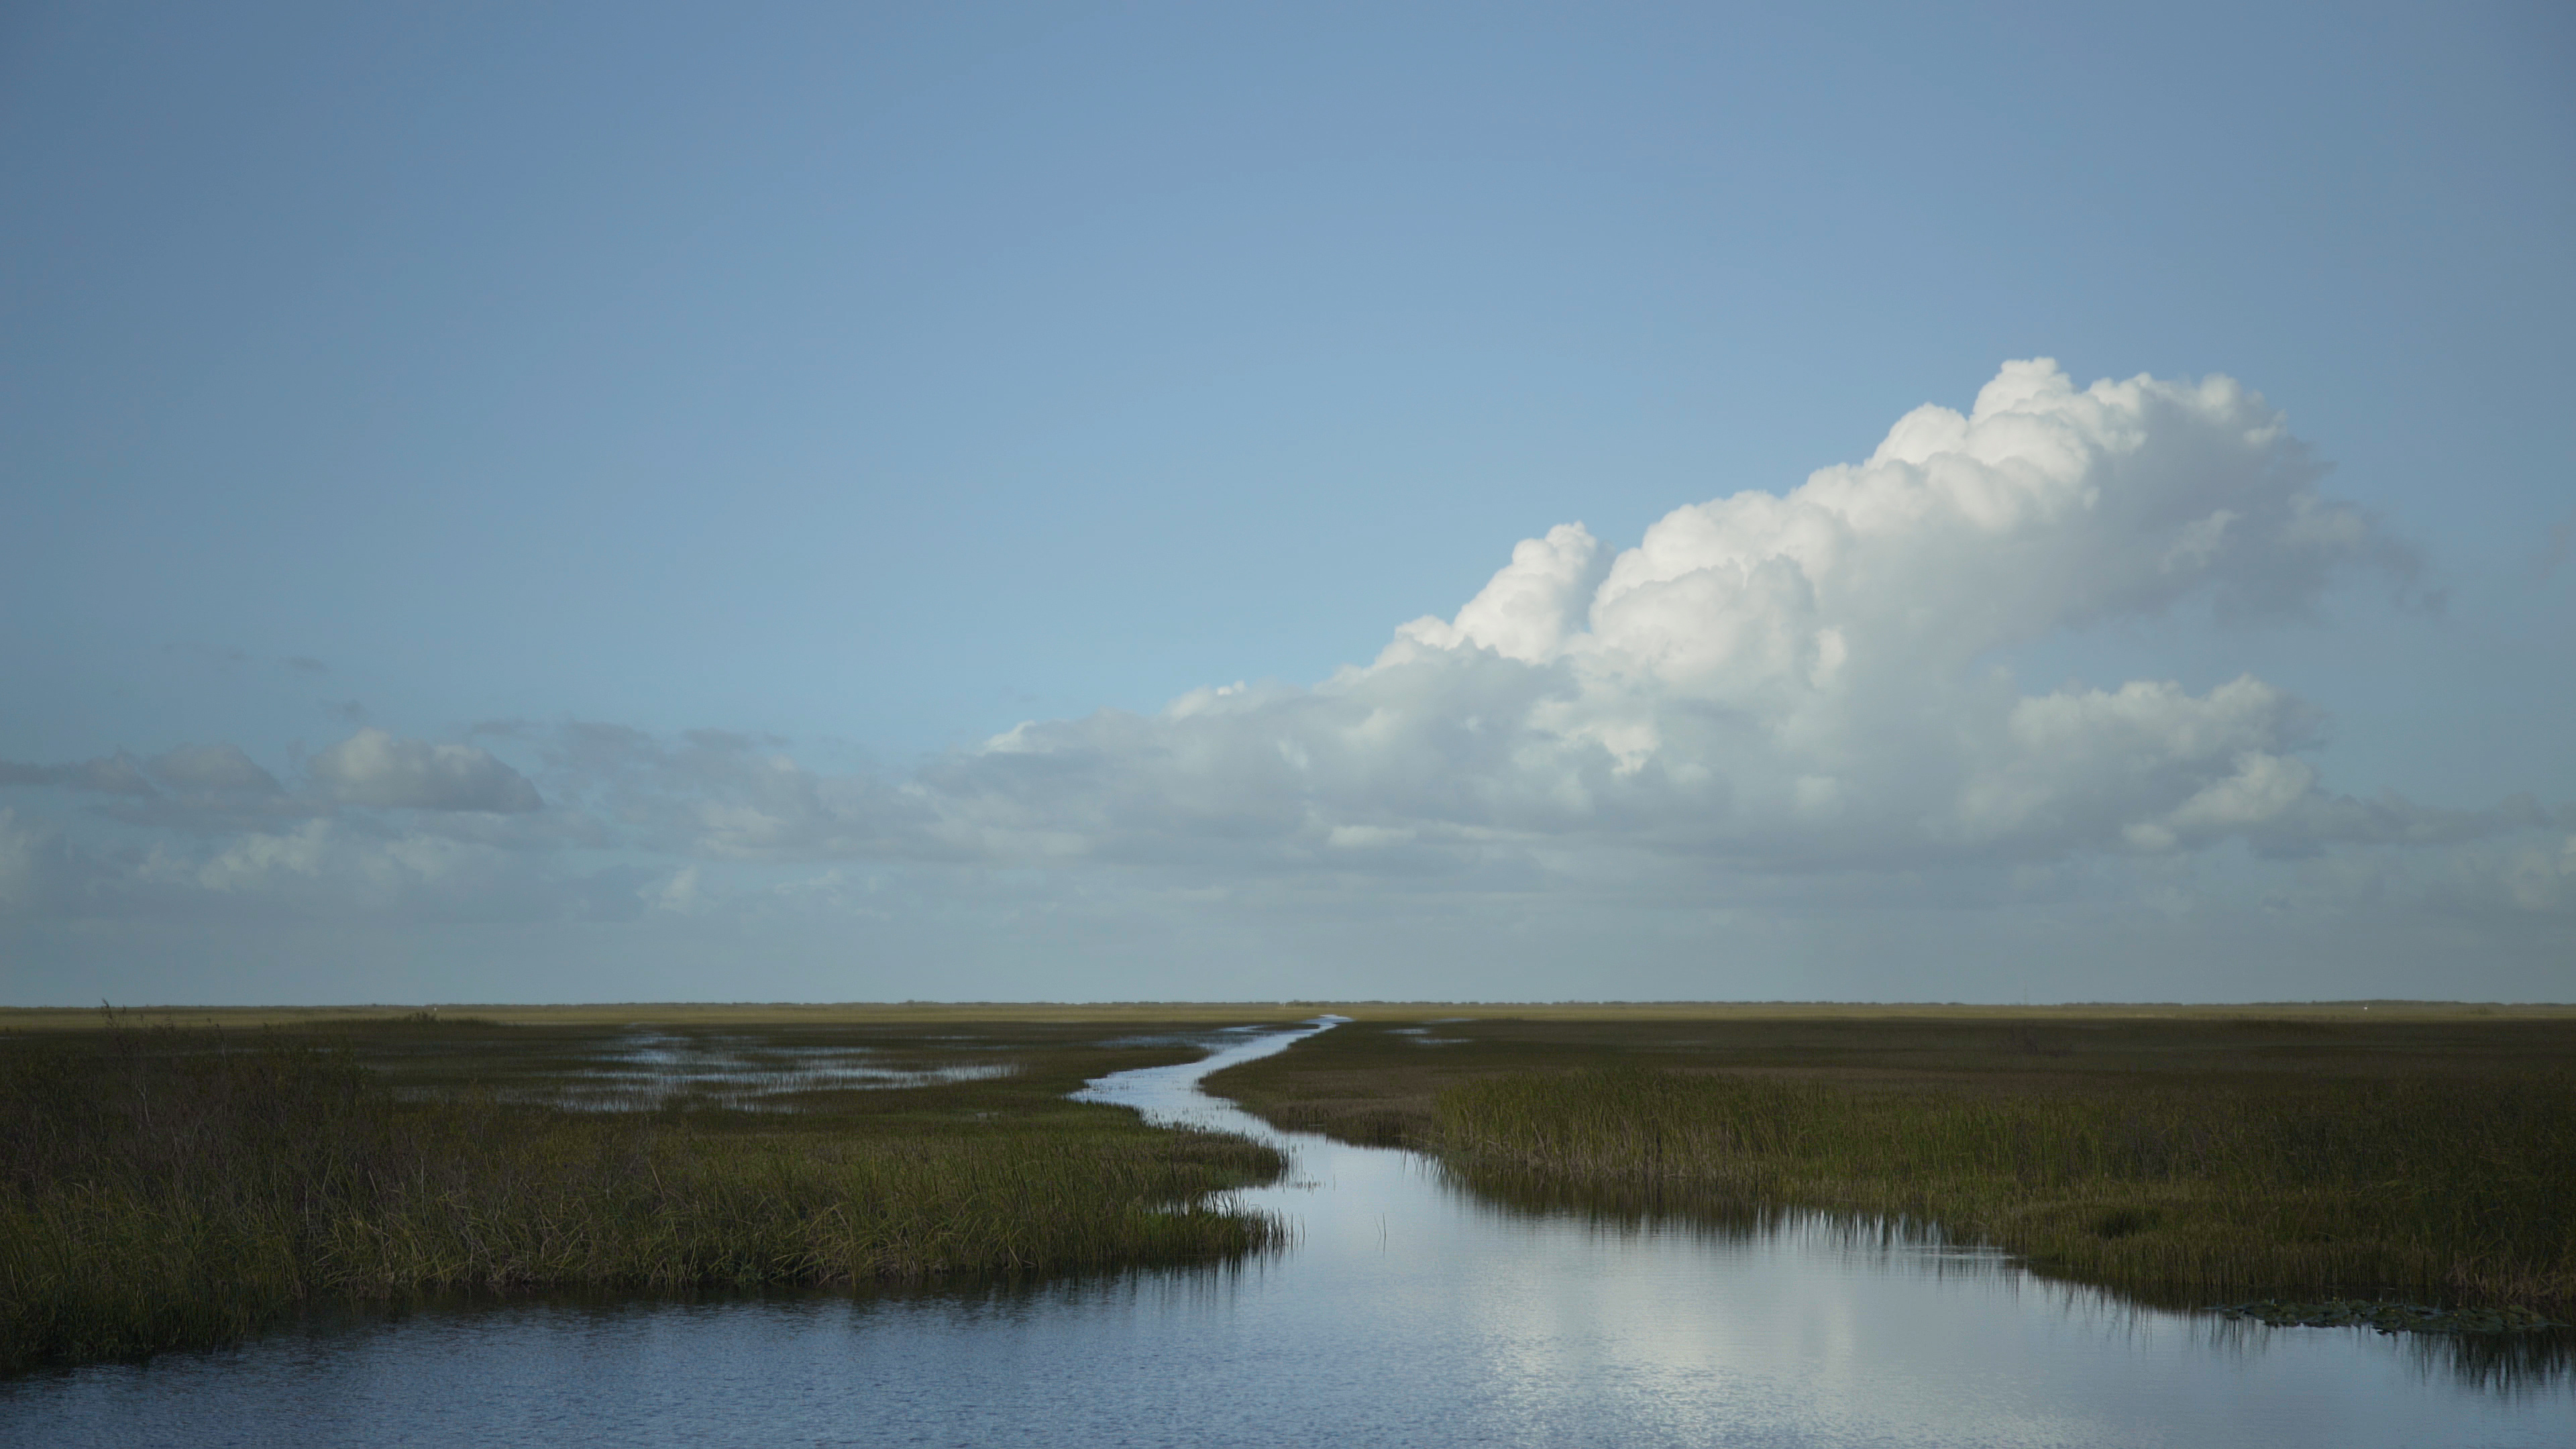 water meanders through a sawgrass marsh beneath a blue sky and clouds